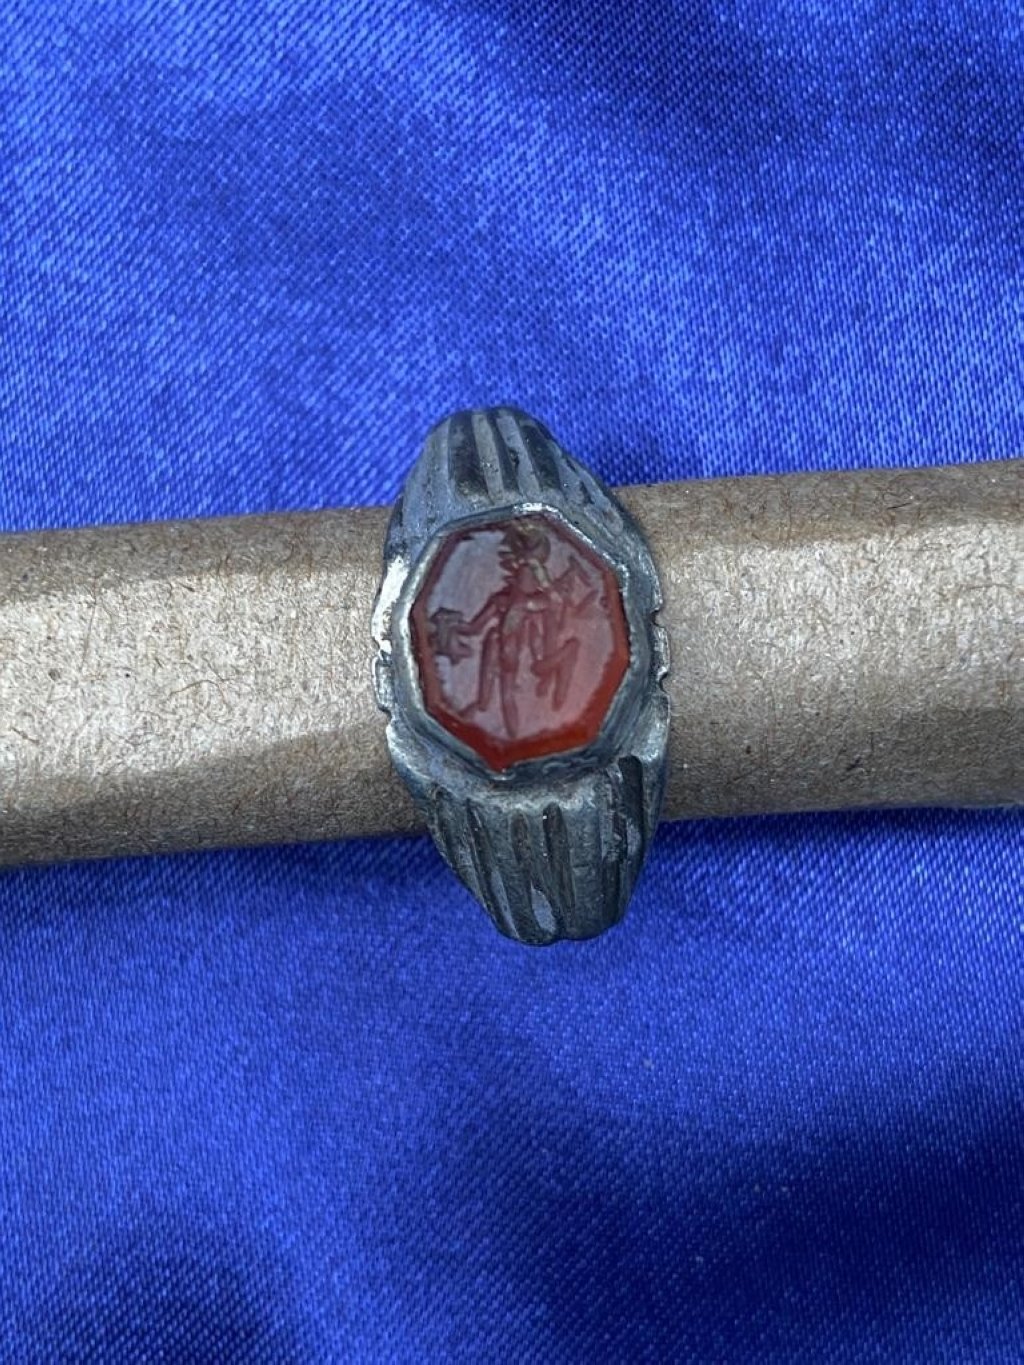 A silver ring with a Hermes figure carved on it was found during excavations. (IHA Photo) 